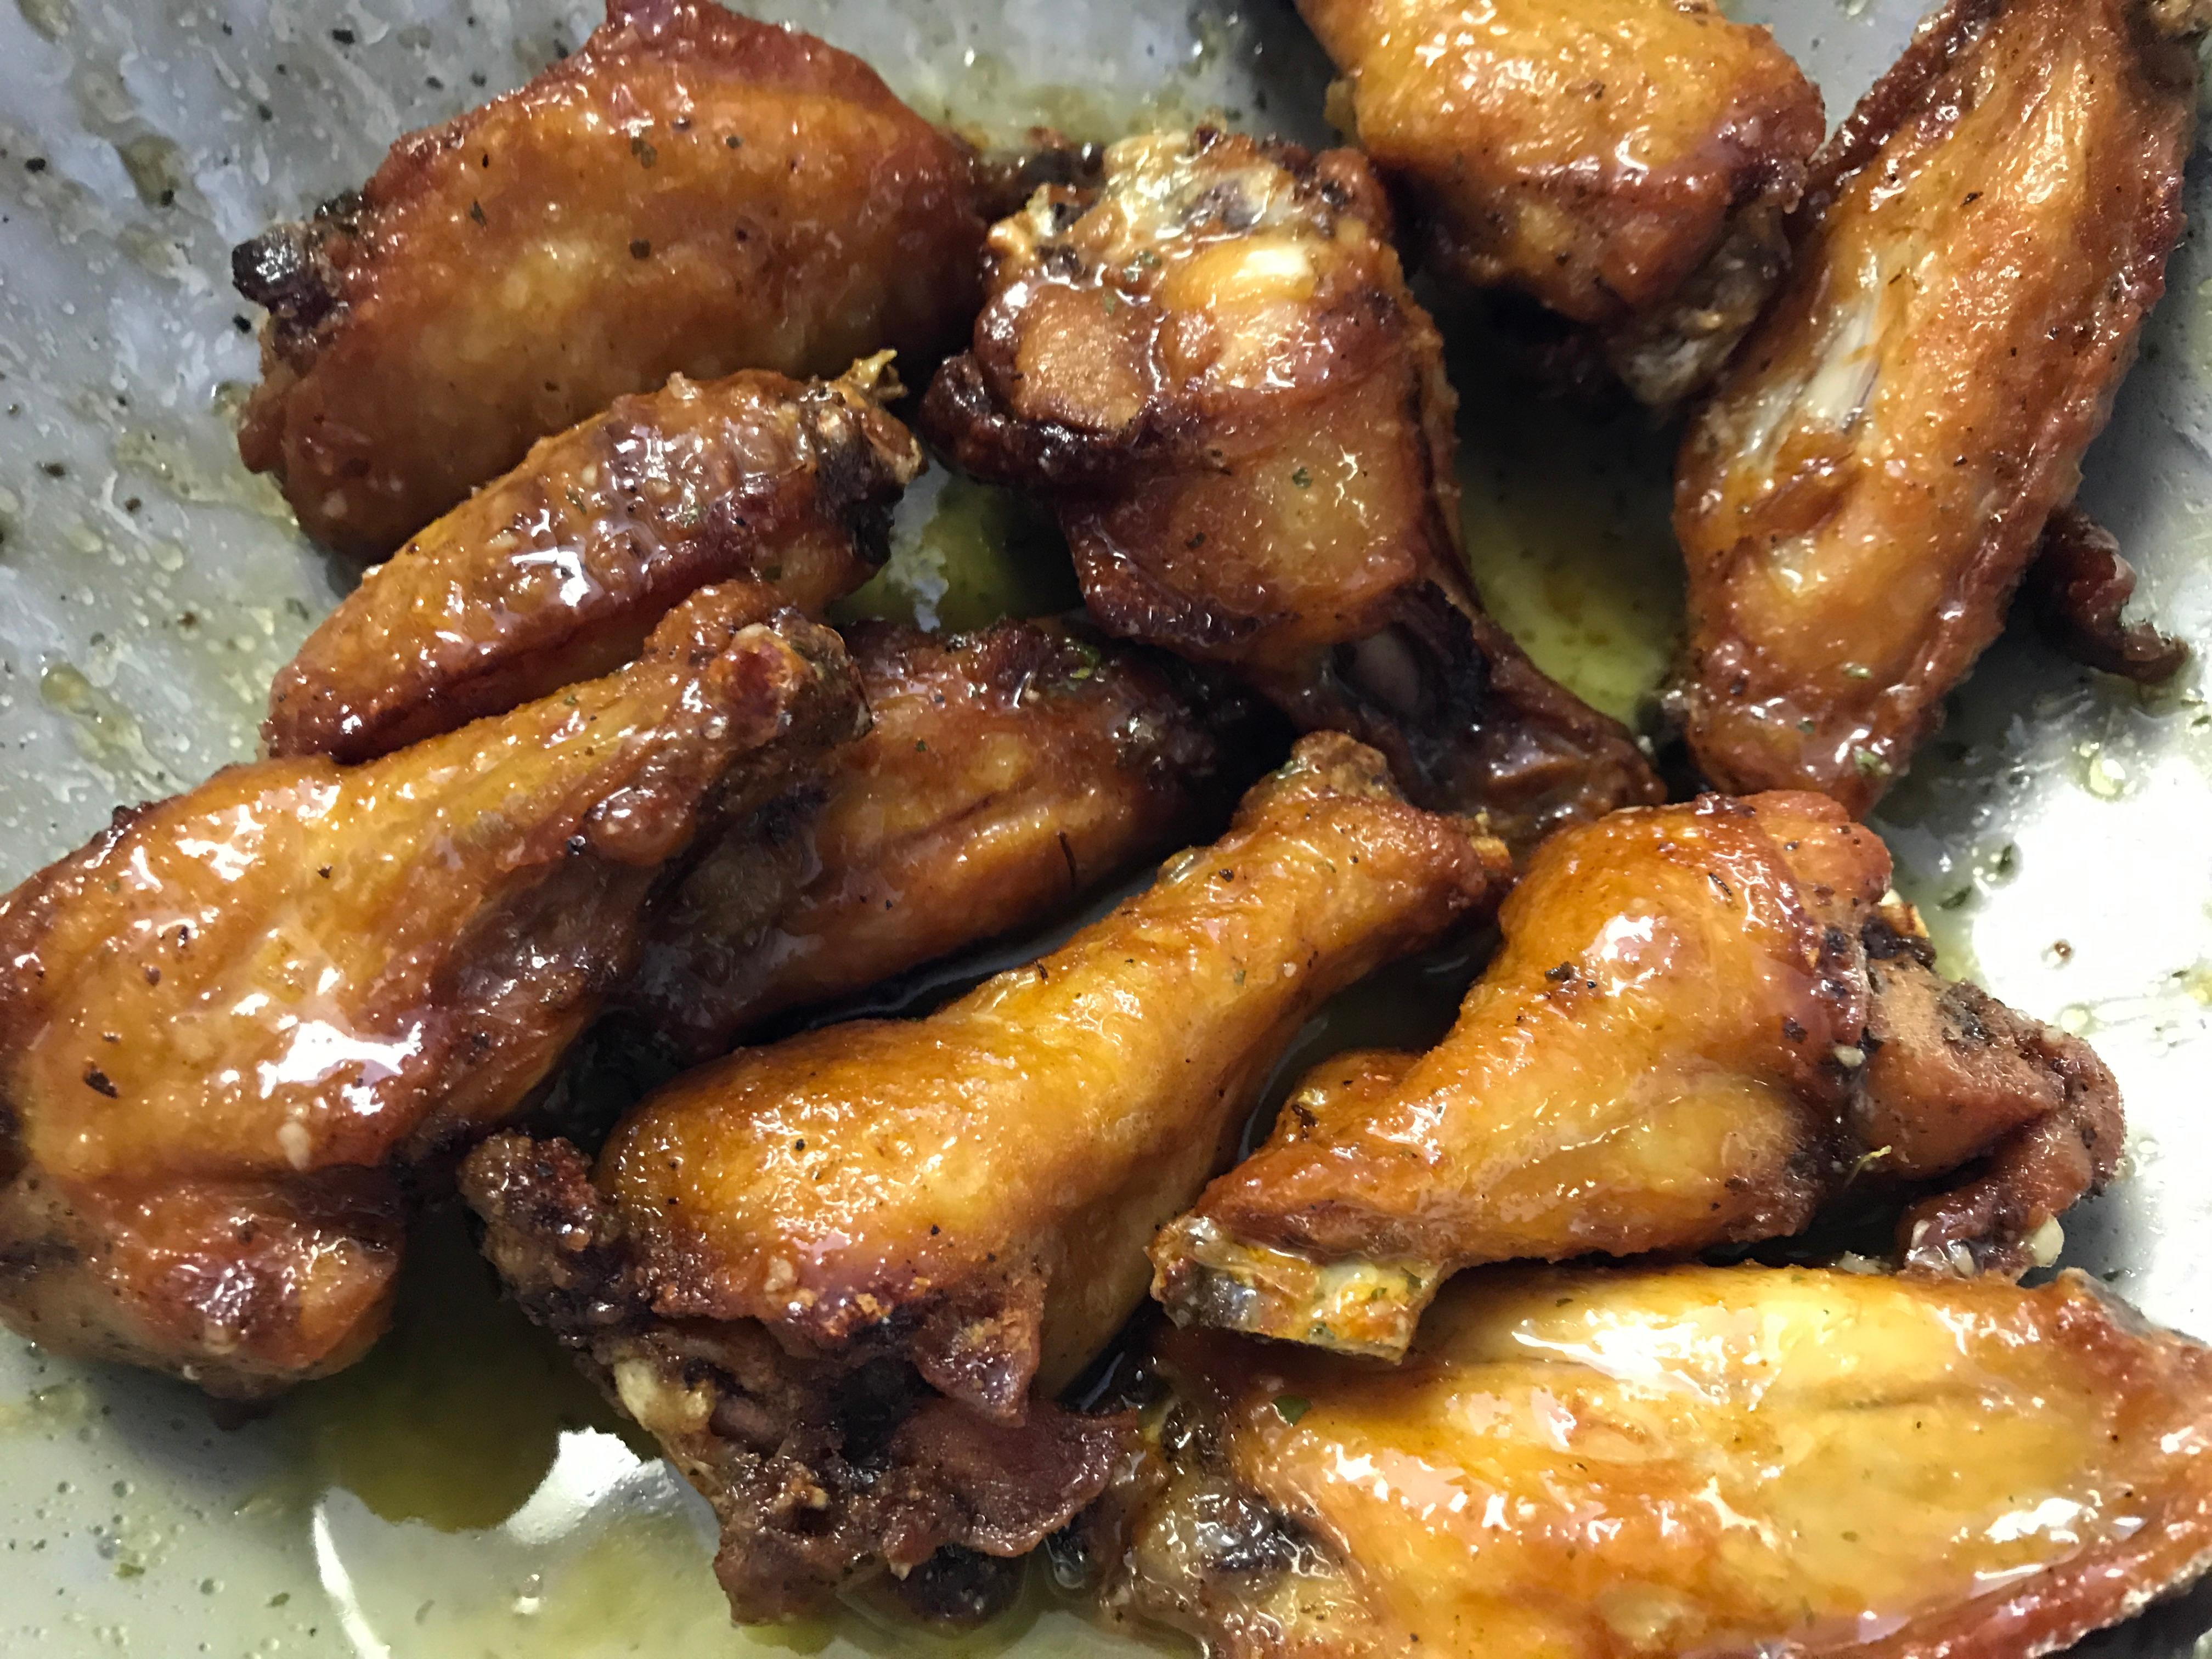 Hot Chicken Wings Made to Order Broadway Pizza & Subs West Palm Beach (561)855-6462